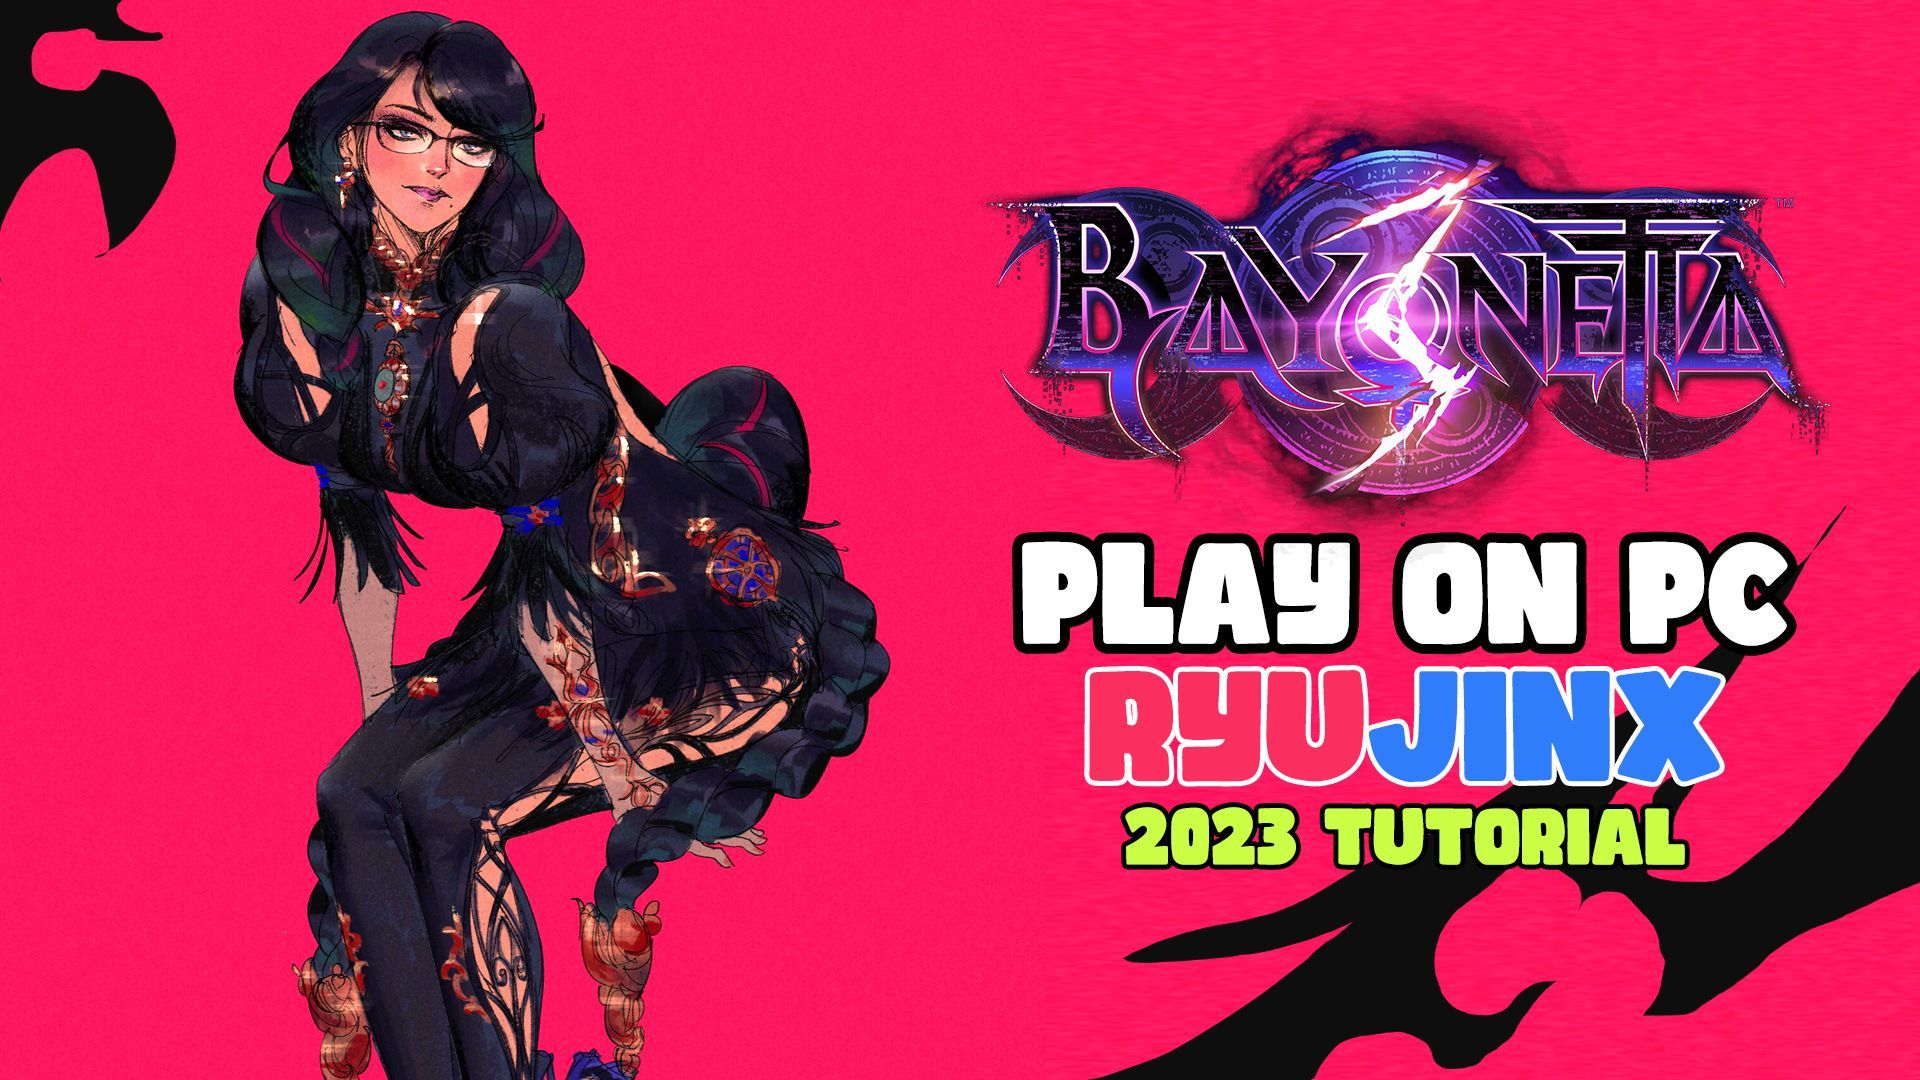 How to get Bayonetta 3 [XCI] and Play on PC Tutorial - video